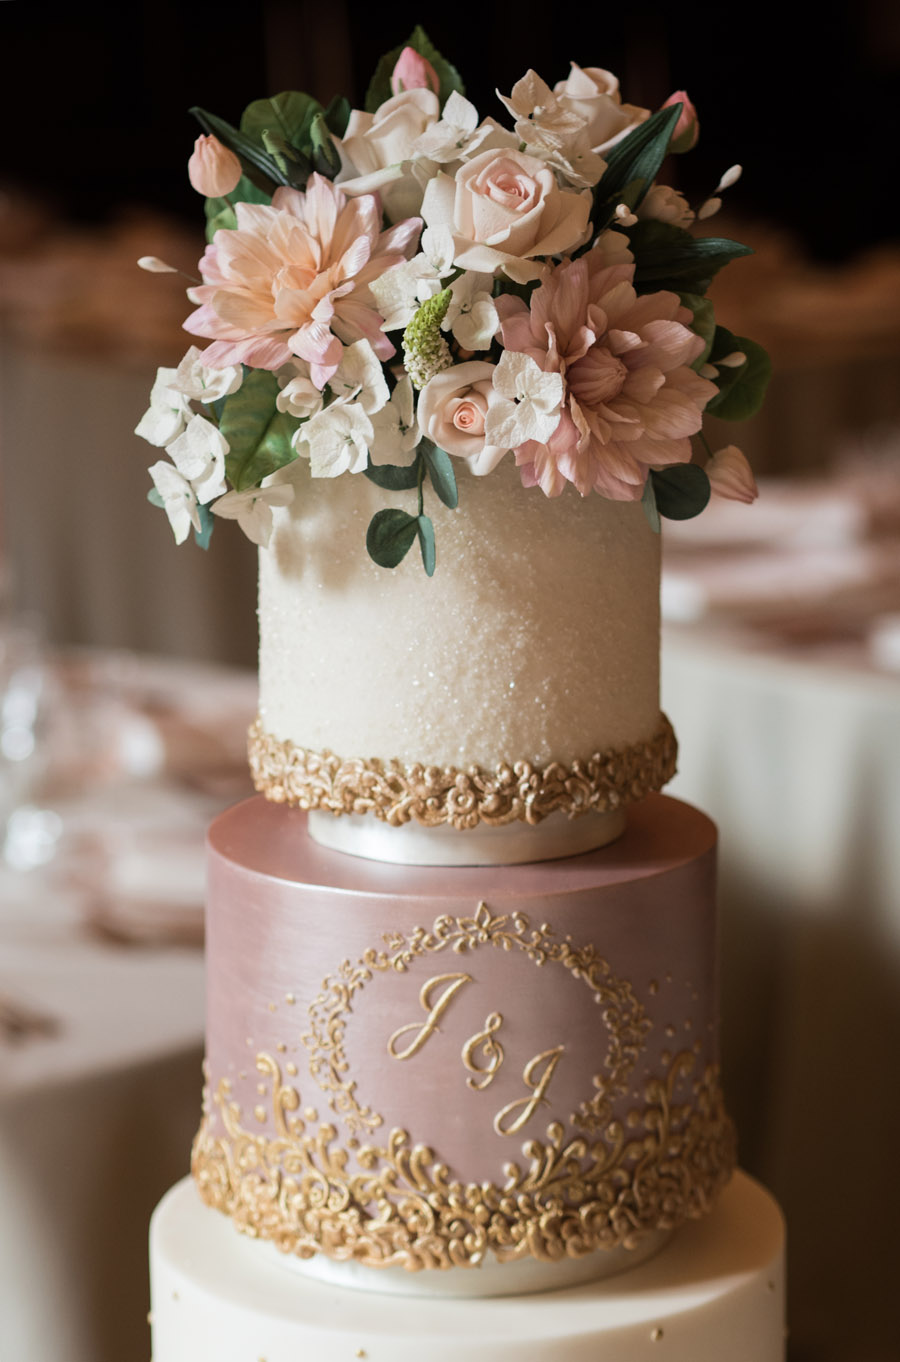 Beautiful wedding cakes by The Frostery - trends and ideas for 2019 (9)